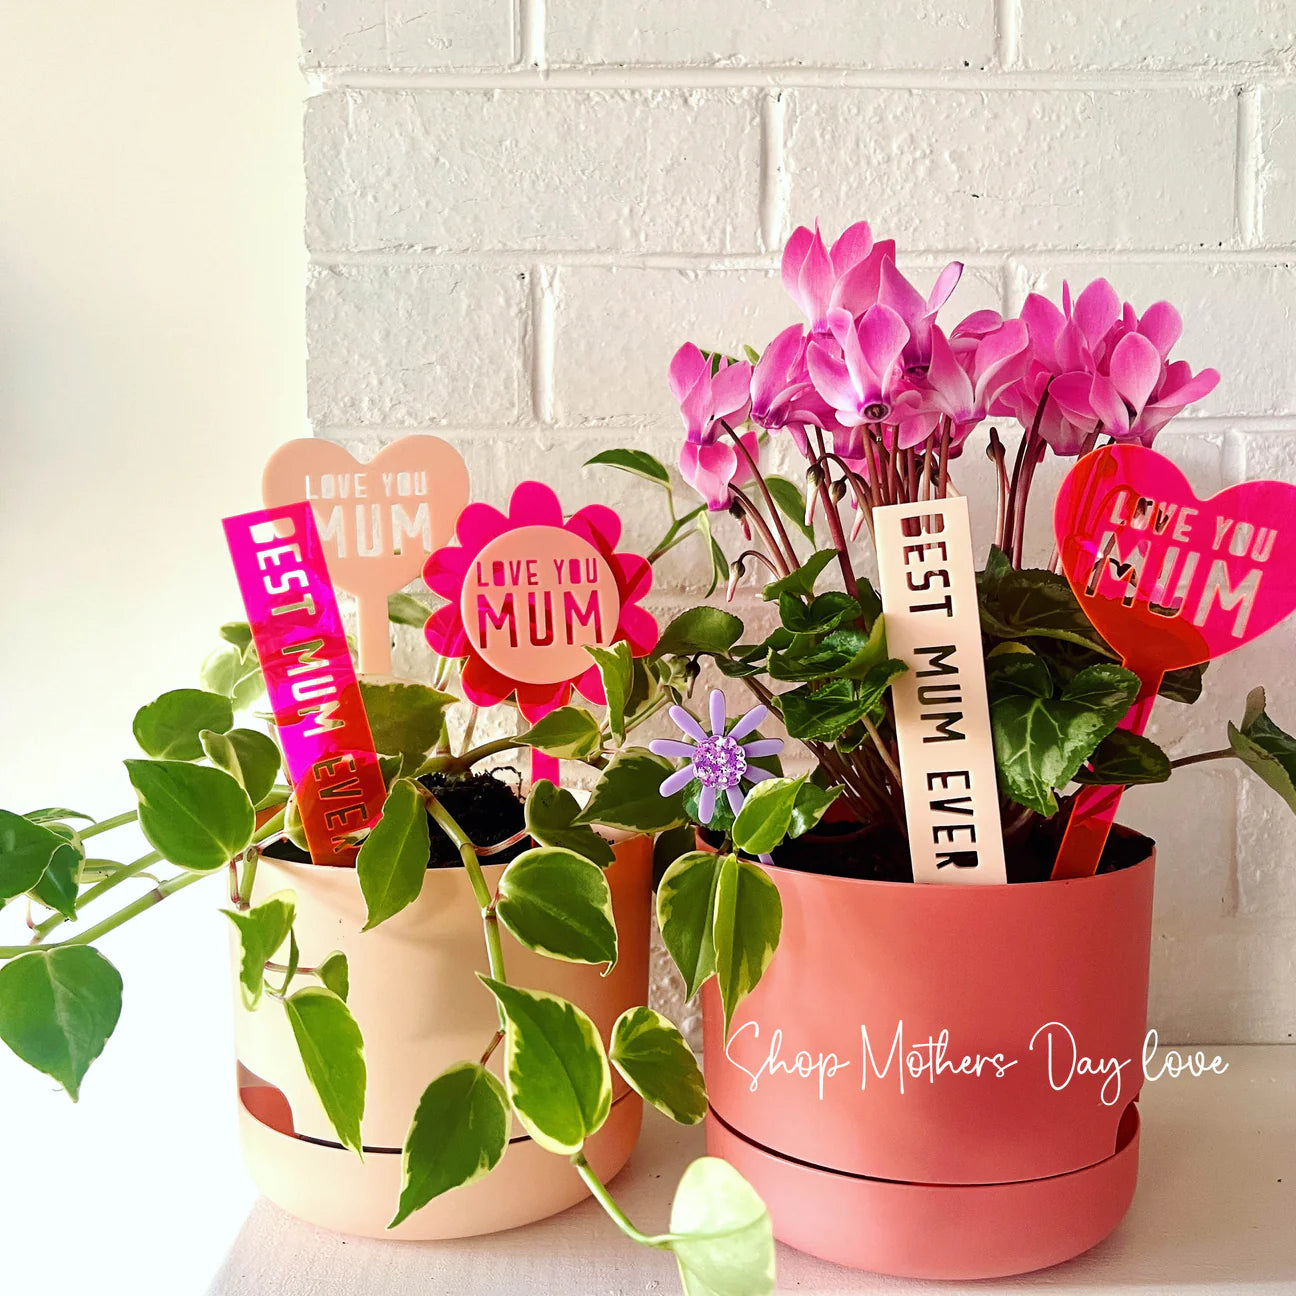 Love you mum plant heart stakes-Little Fish Co.